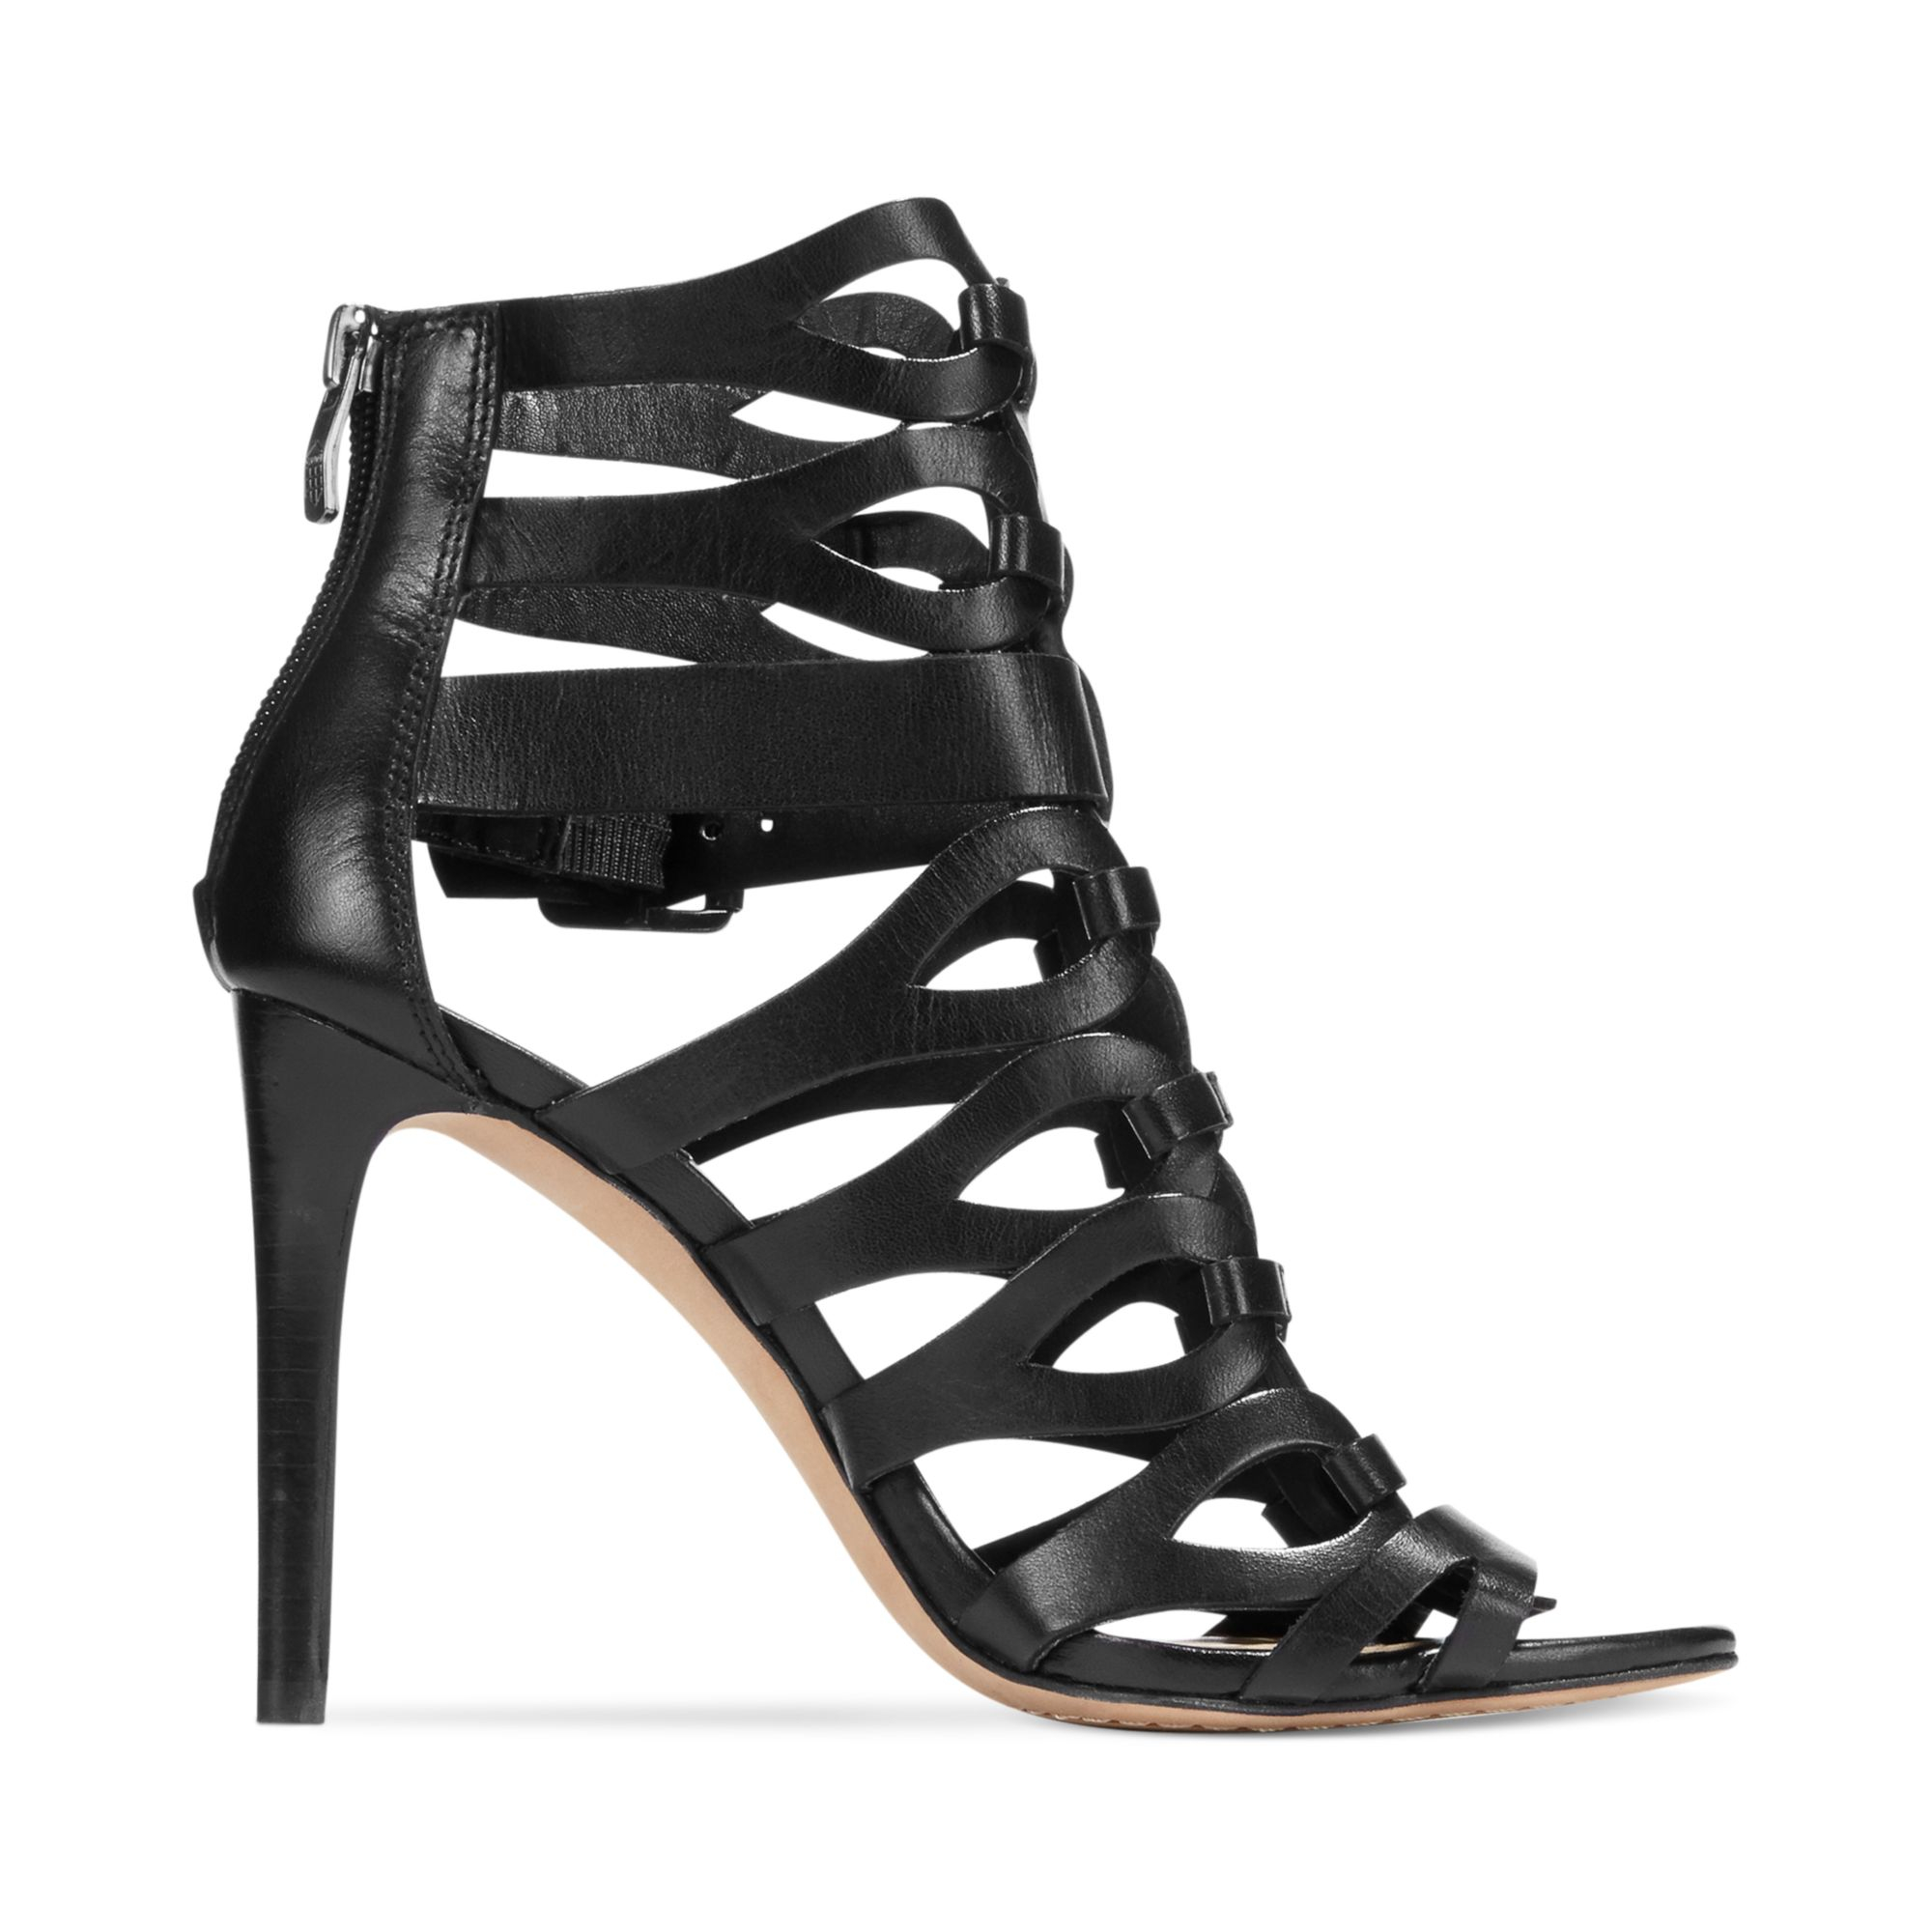 Vince camuto Ombre Gladiator High Heel Sandals in Black | Lyst